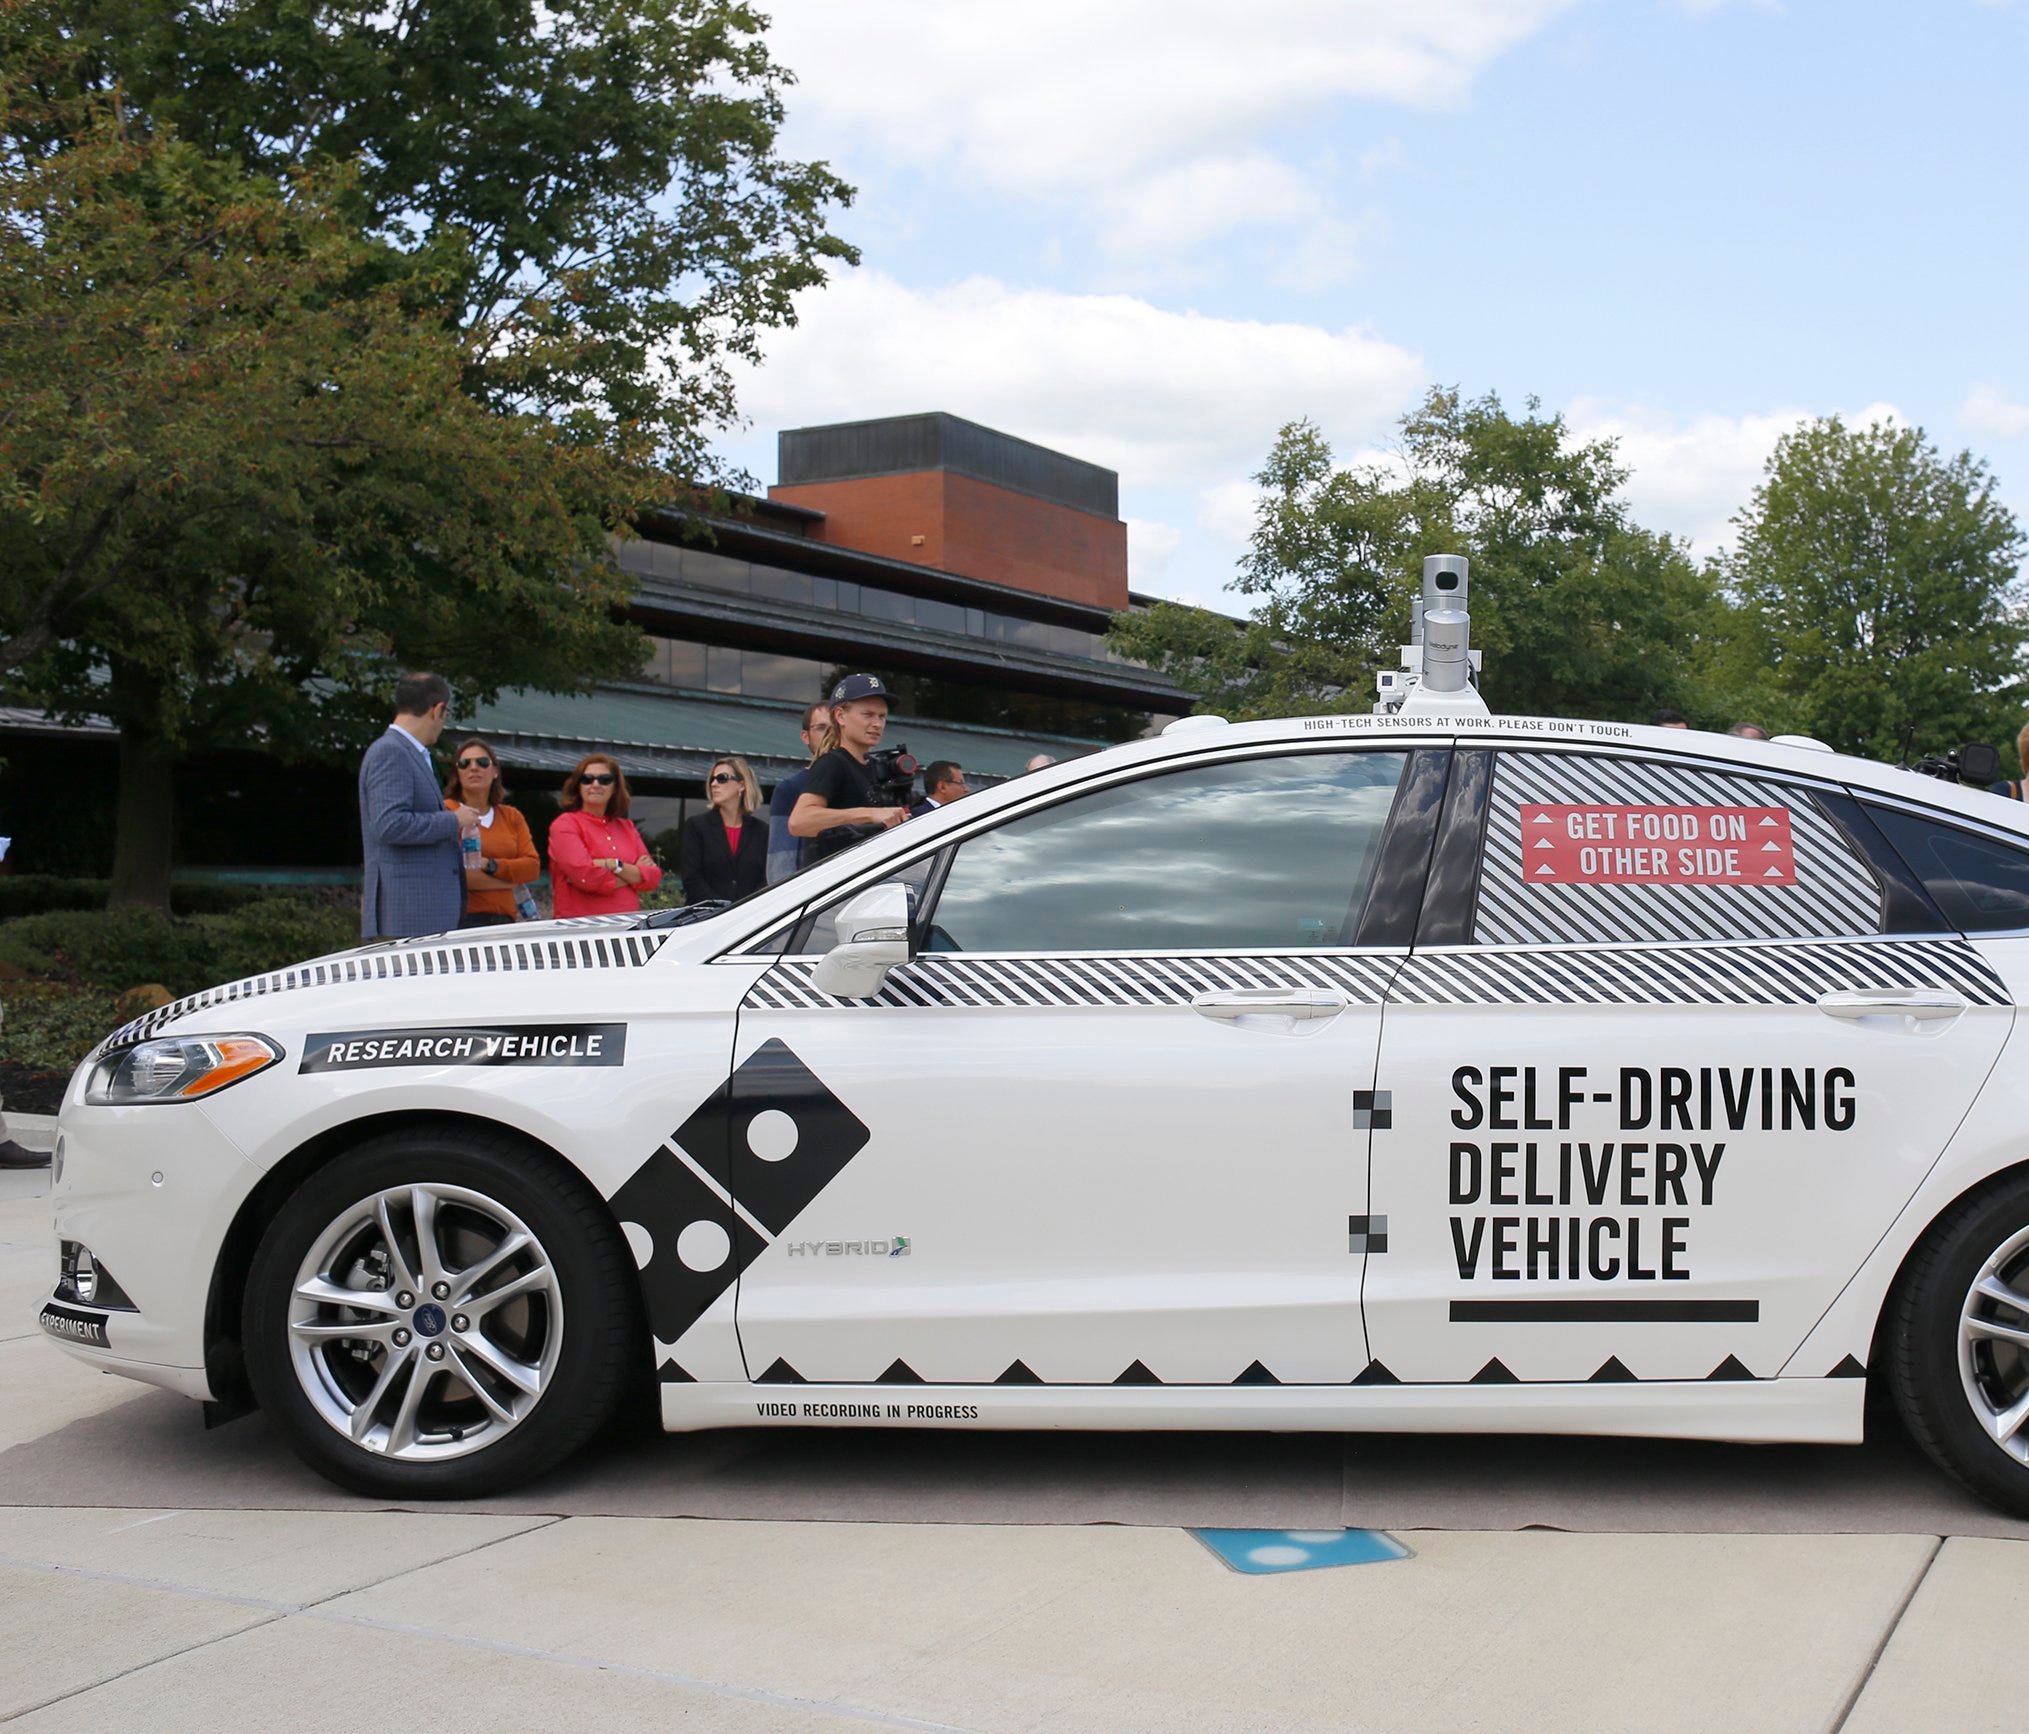 The Ford Fusion hybrid autonomous research vehicle, which will be used as the self-driving pizza delivery vehicle in a partnership between Ford and Domino's, photographed on Friday, August 25, 2017 at Domino's Farms in Ann Arbor.